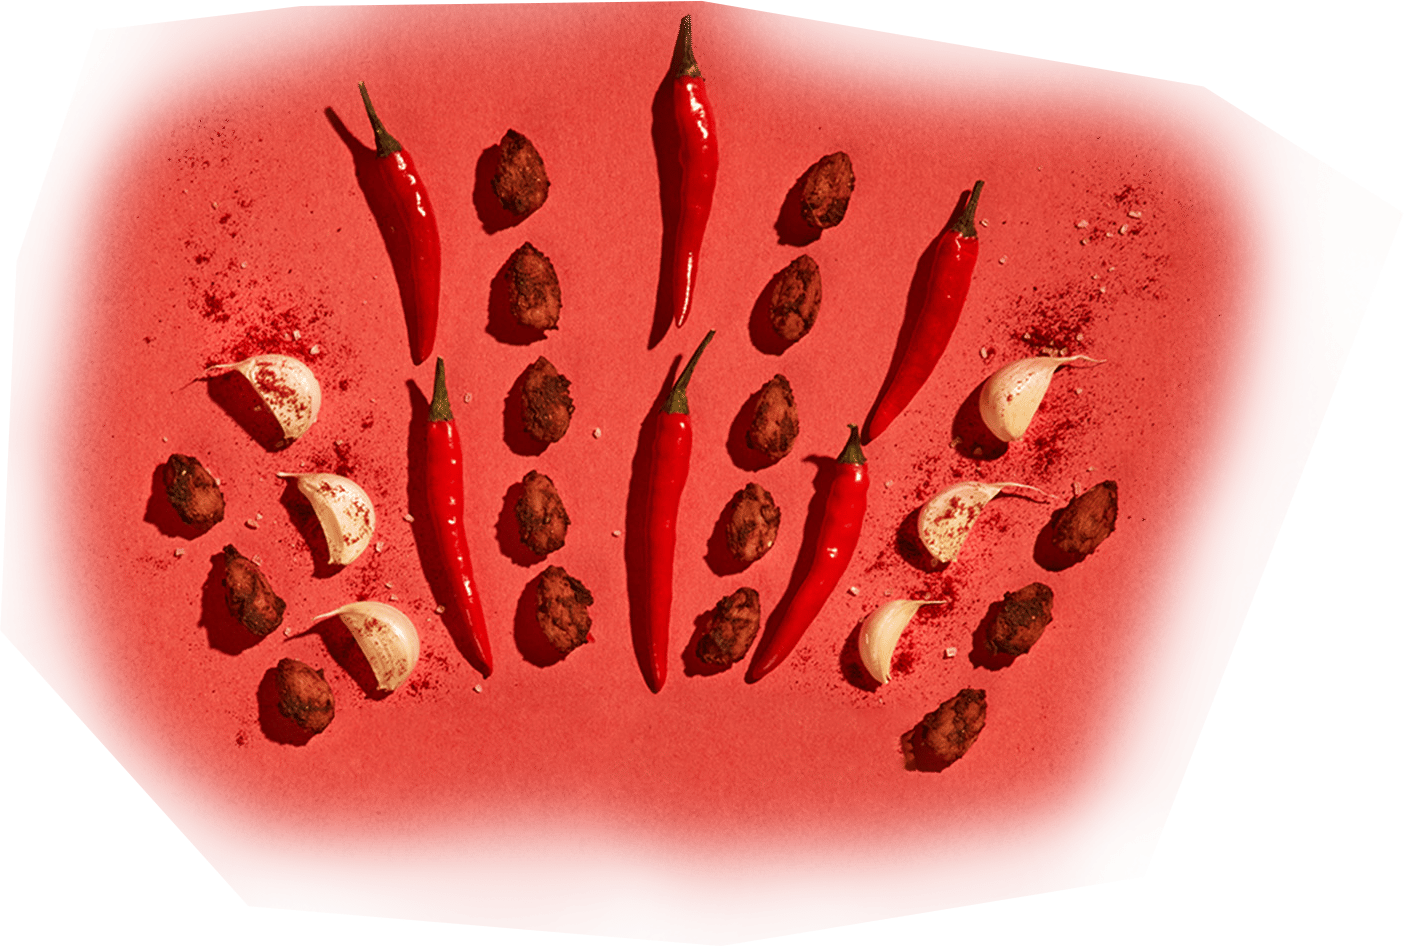 Red chili peppers, Garlic cloves, Almonds, Chili powder, Red